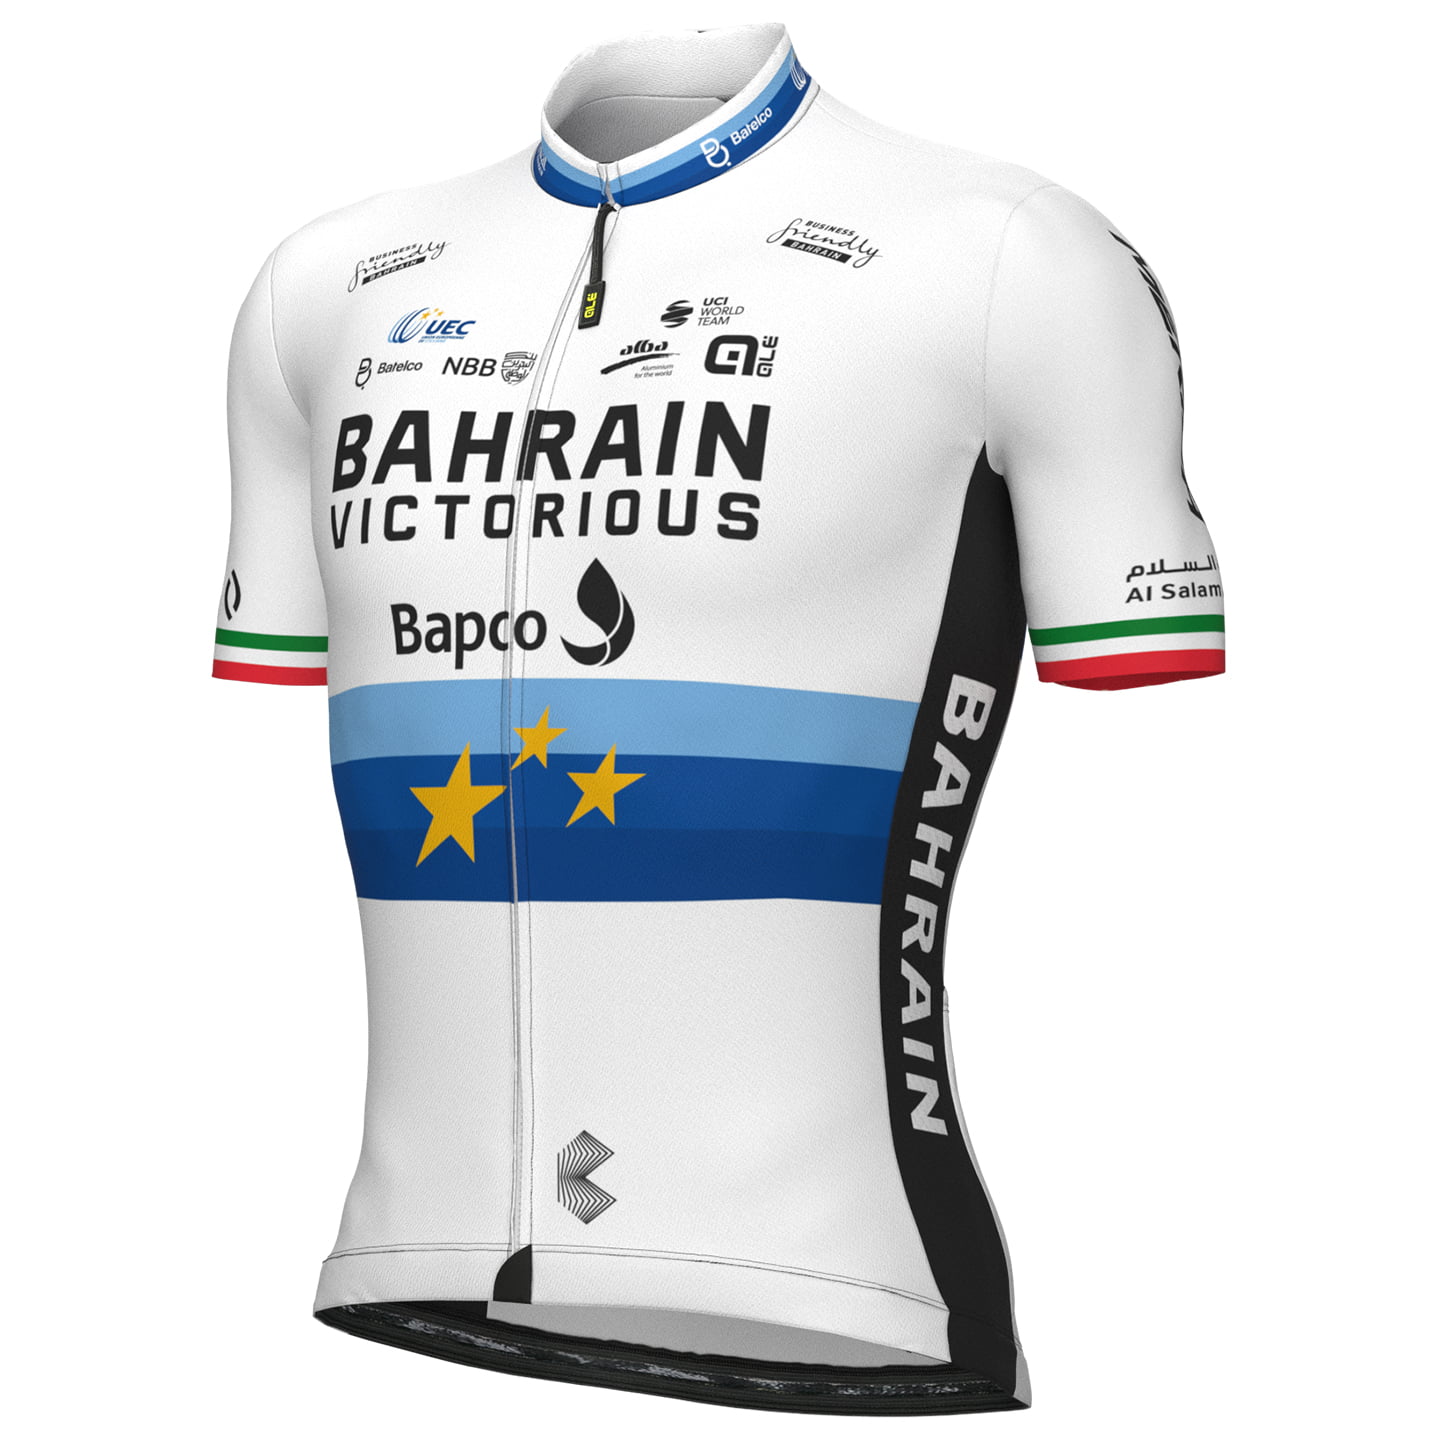 BAHRAIN - VICTORIOUS Short Sleeve Jersey European Champion 2022, for men, size L, Cycling shirt, Cycle clothing